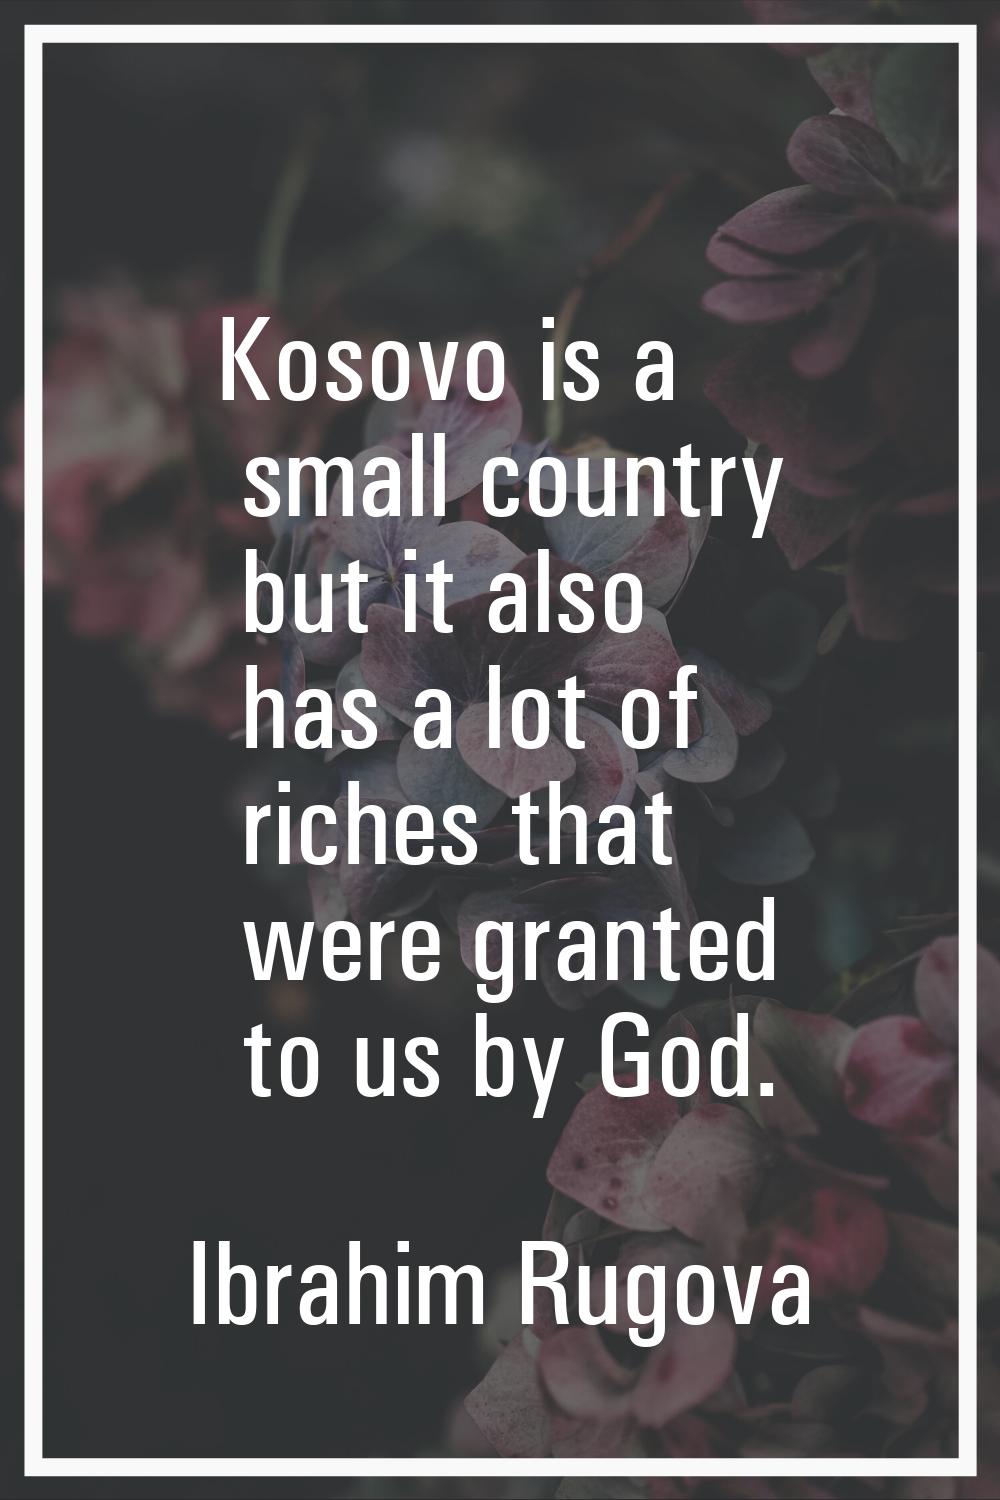 Kosovo is a small country but it also has a lot of riches that were granted to us by God.